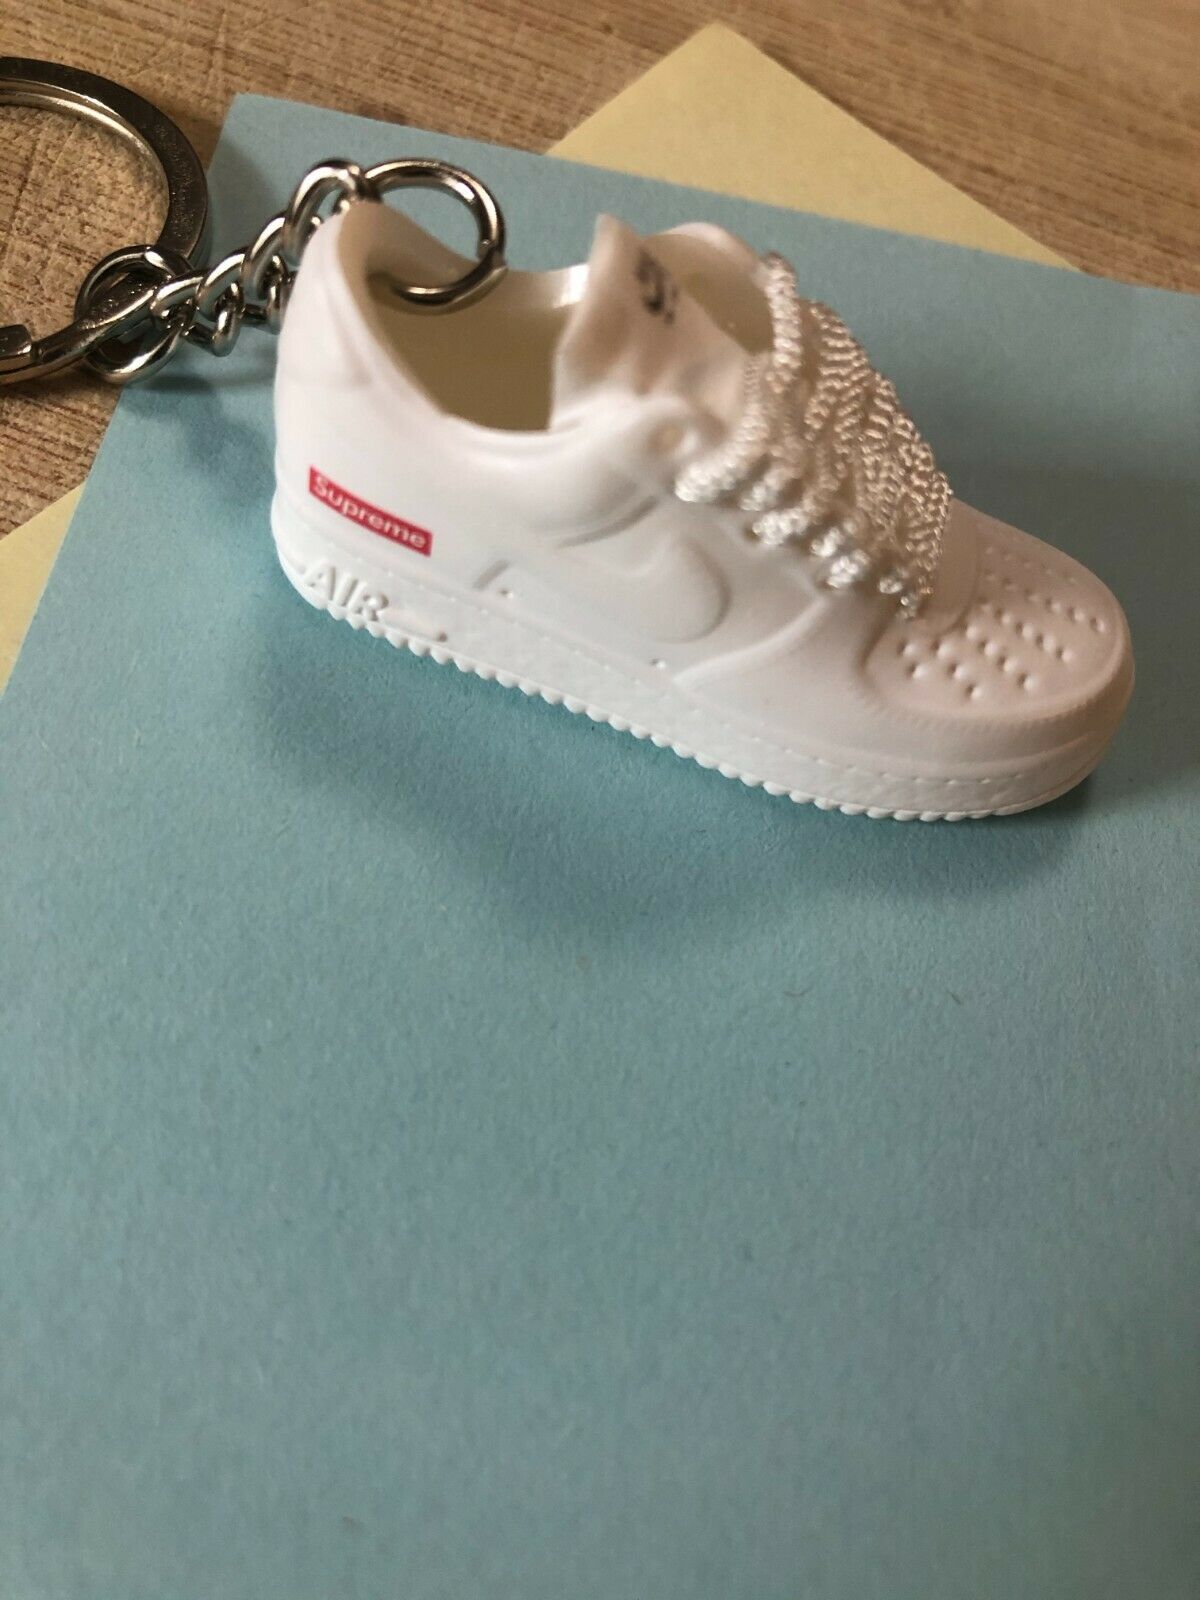 New Mini 3D AIR FORCE 1 Supreme sneaker shoes keychain Hand-painted.